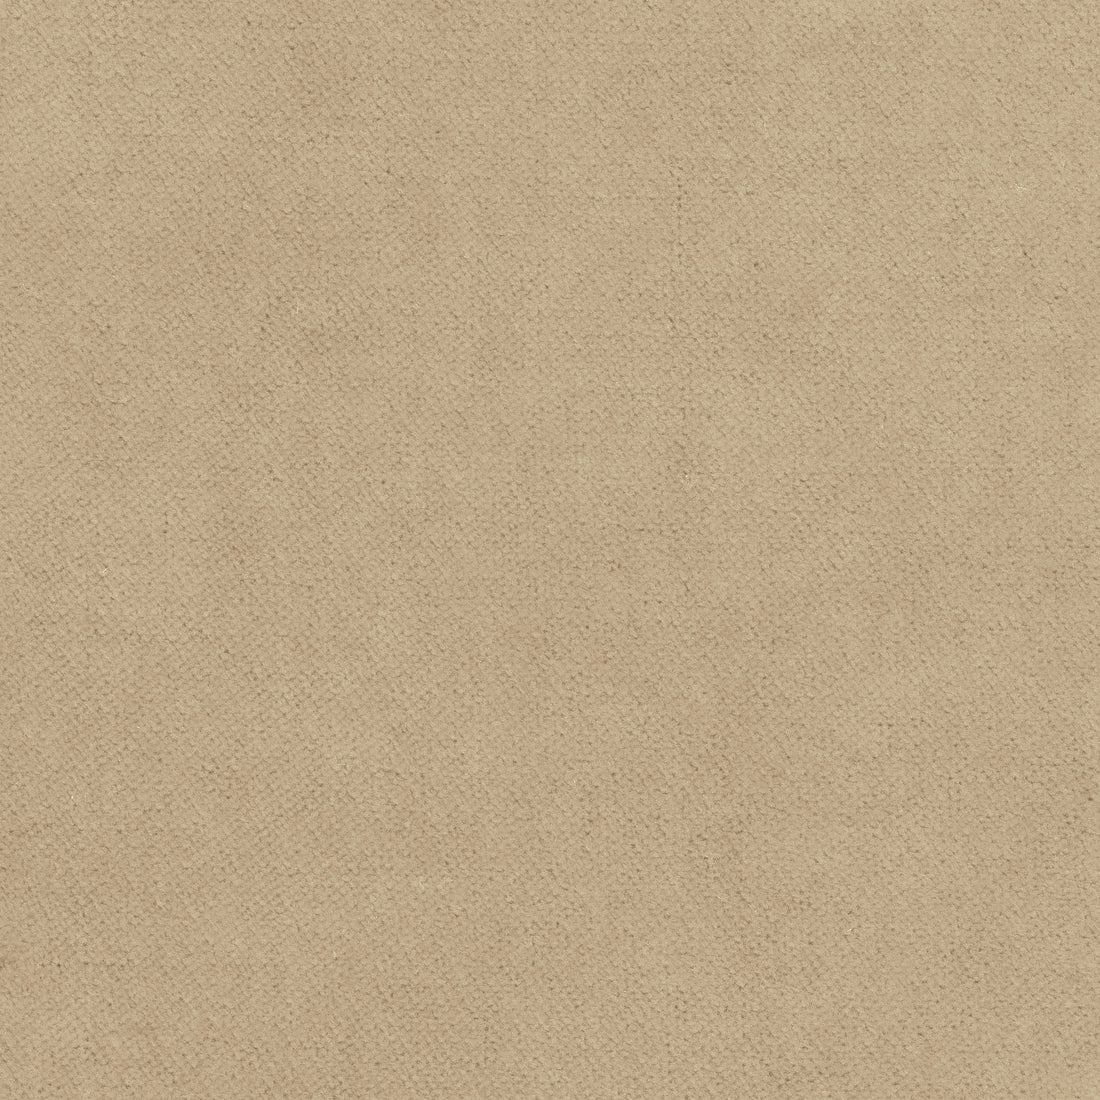 Club Velvet fabric in sand color - pattern number W7231 - by Thibaut in the Club Velvet collection